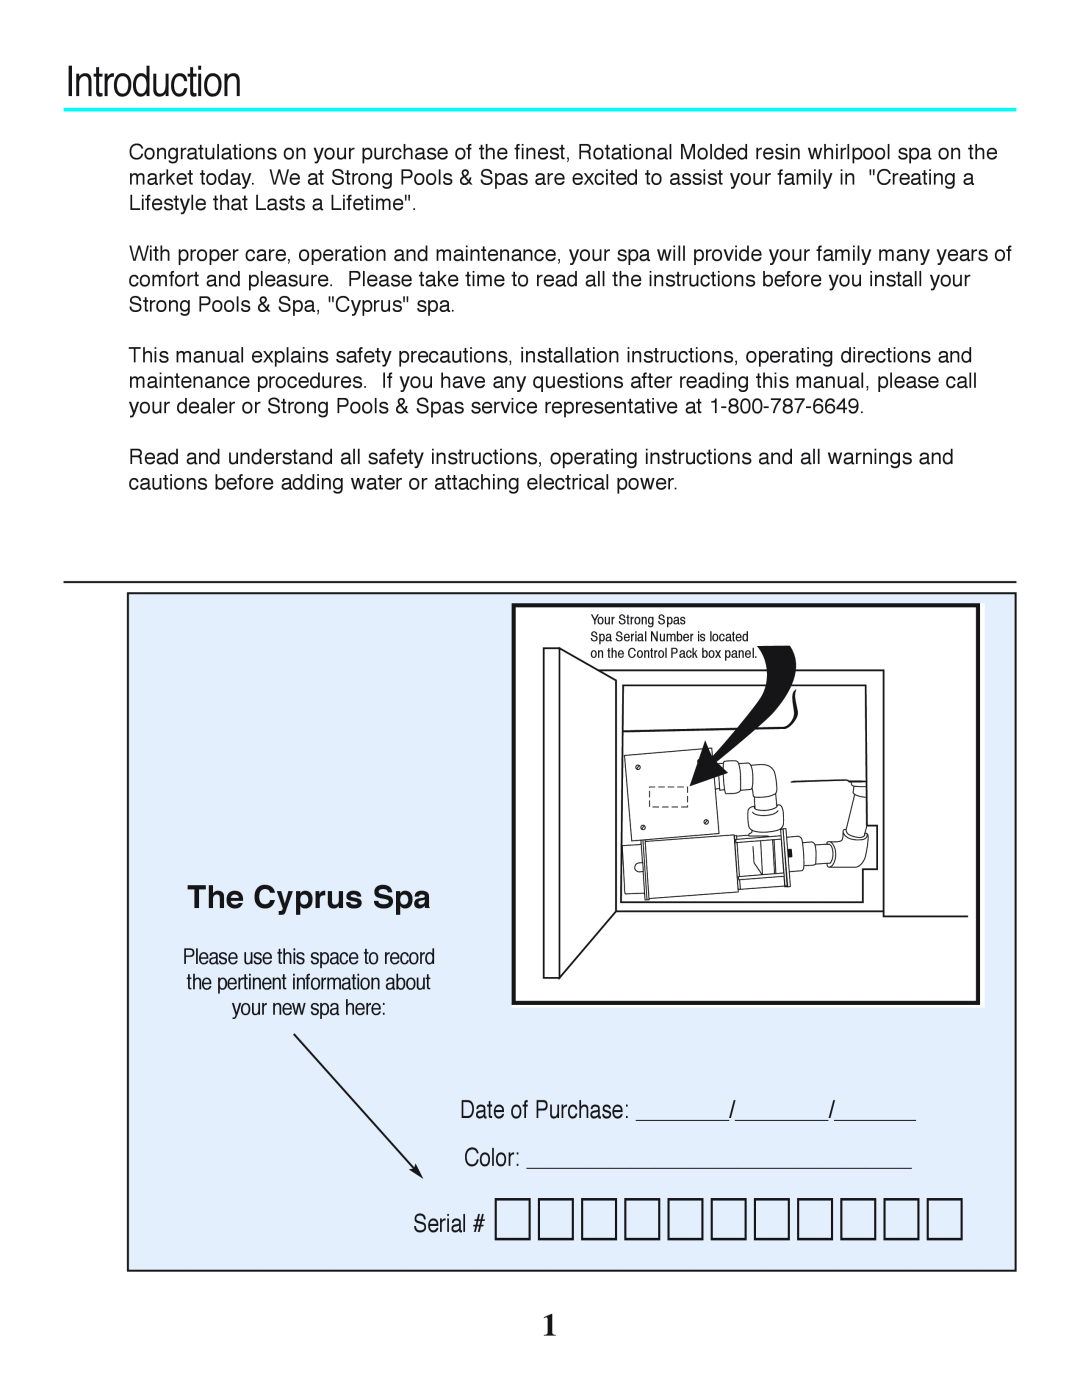 Strong Pools and Spas owner manual Introduction, The Cyprus Spa, Date of Purchase Color Serial # 